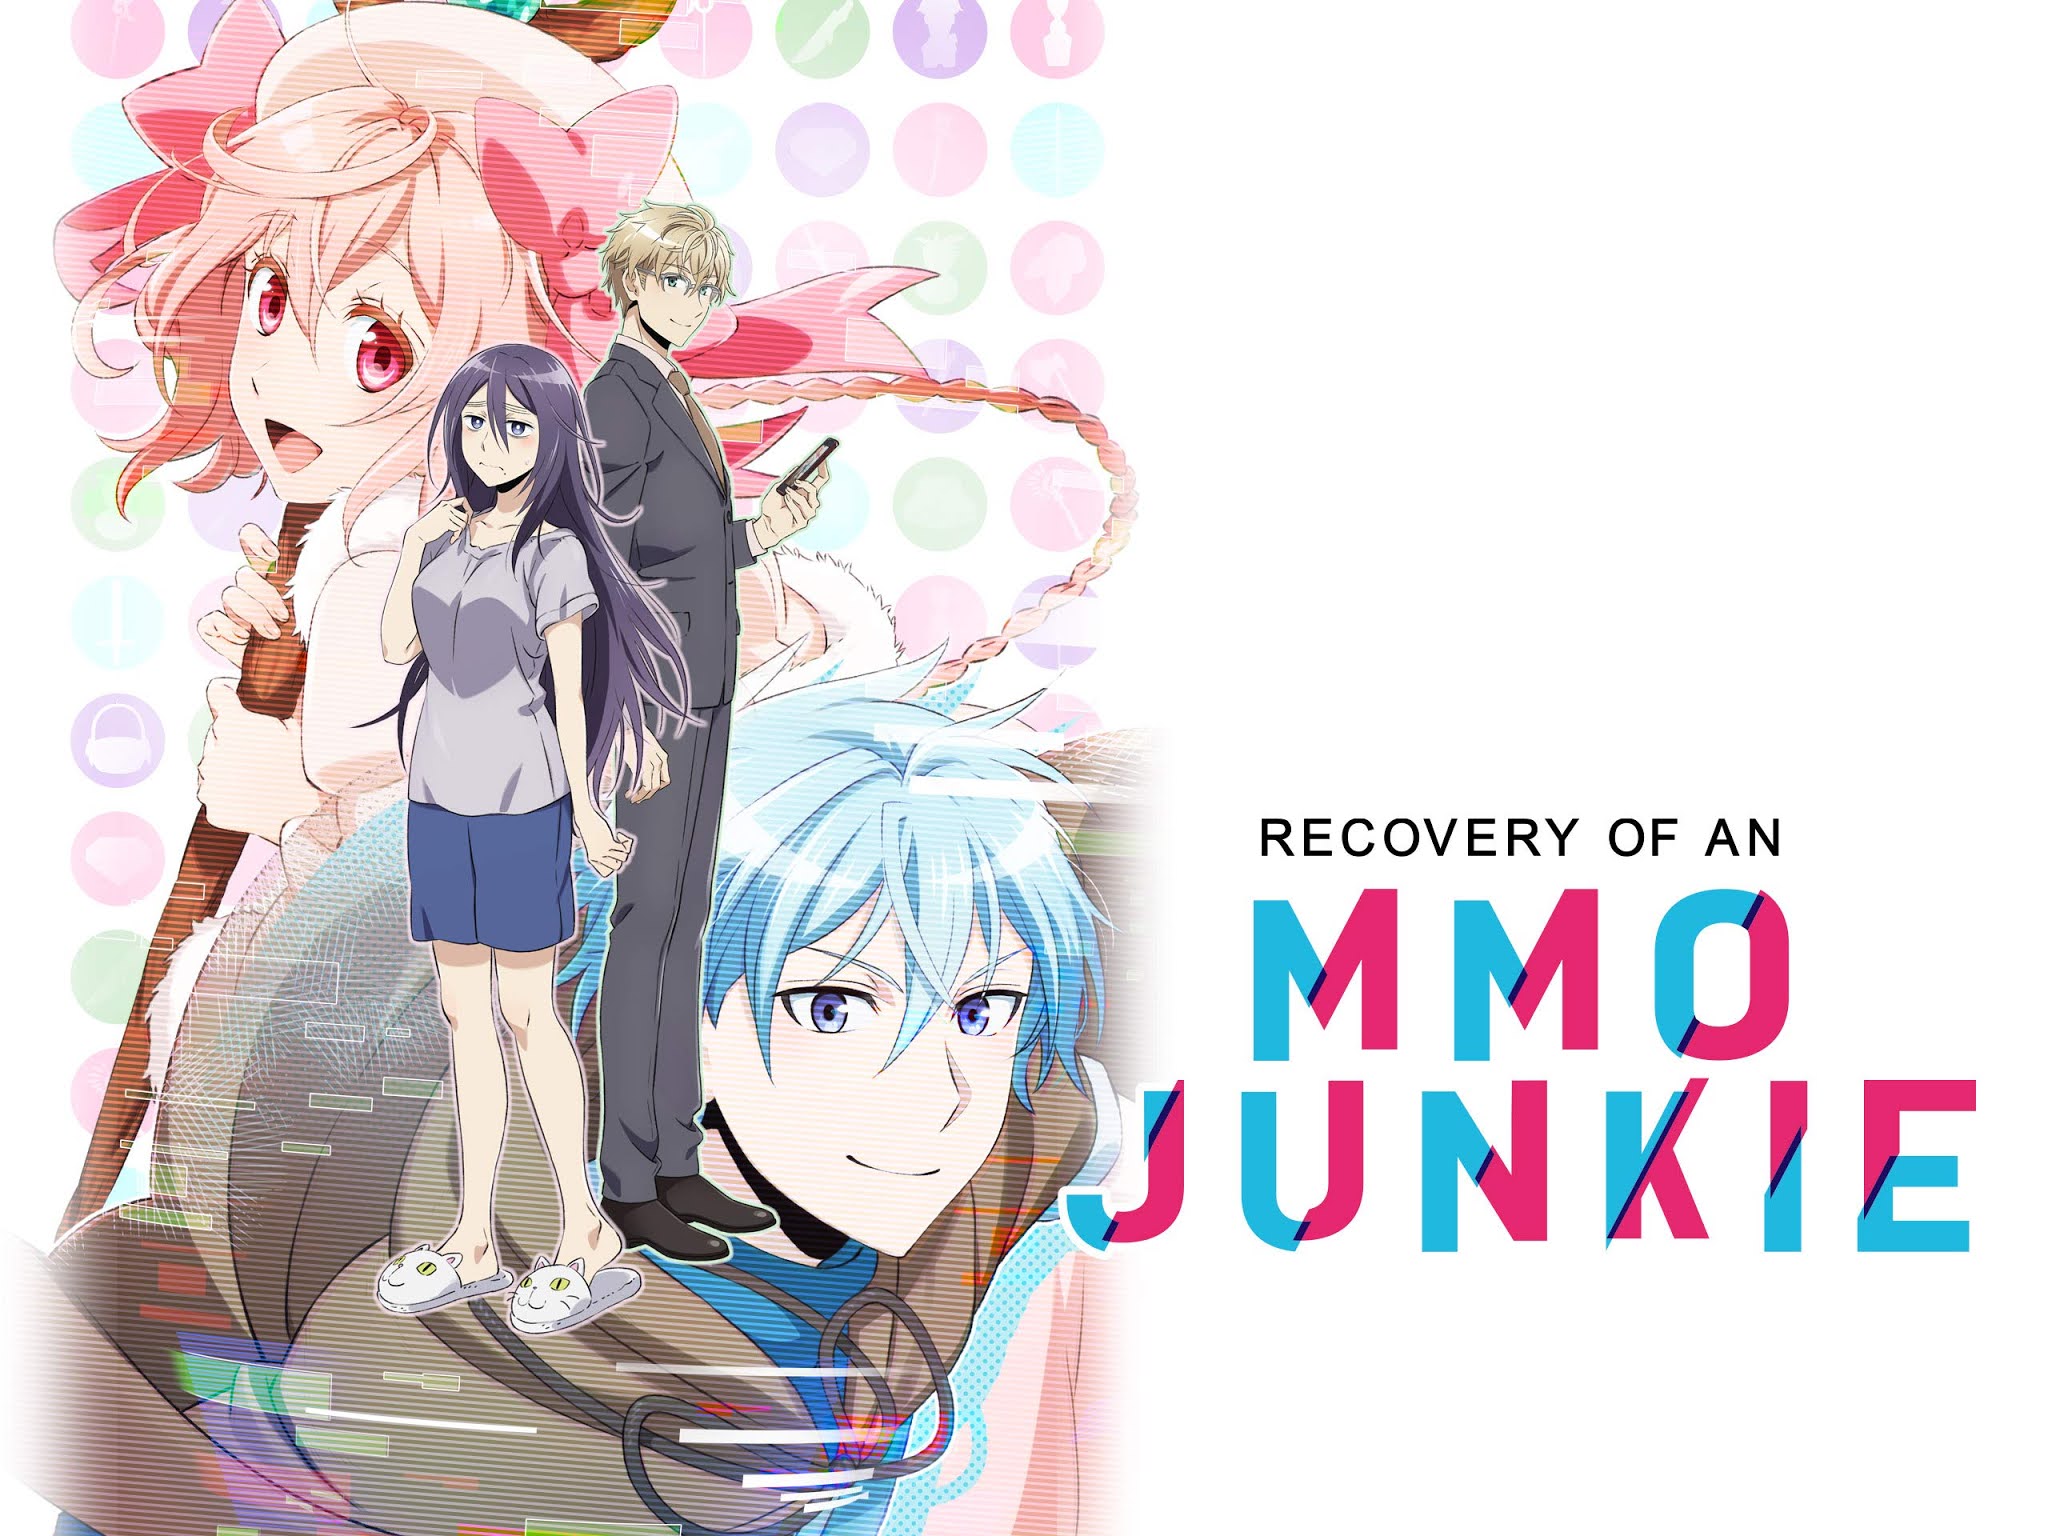 8. "Recovery of an MMO Junkie" - wide 5